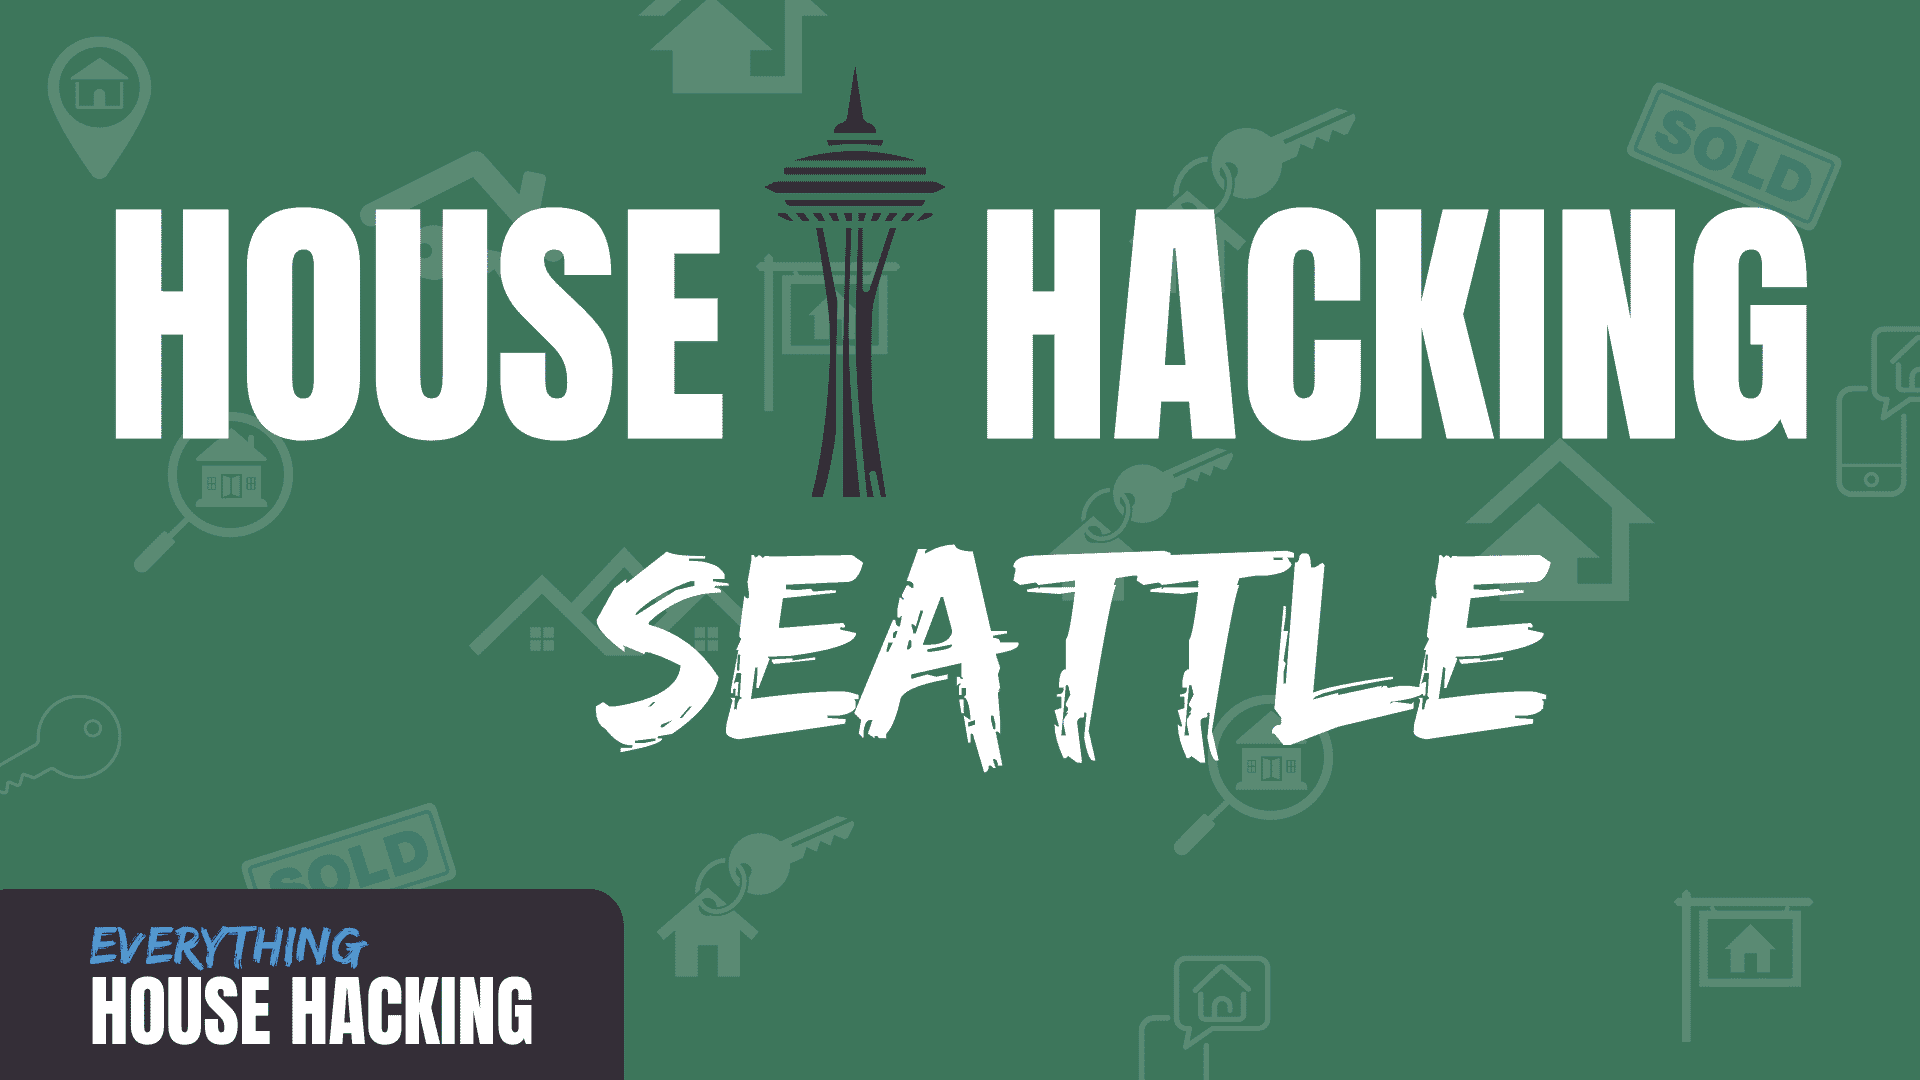 house hacking Seattle in white text on green background with clipart of Seattle building